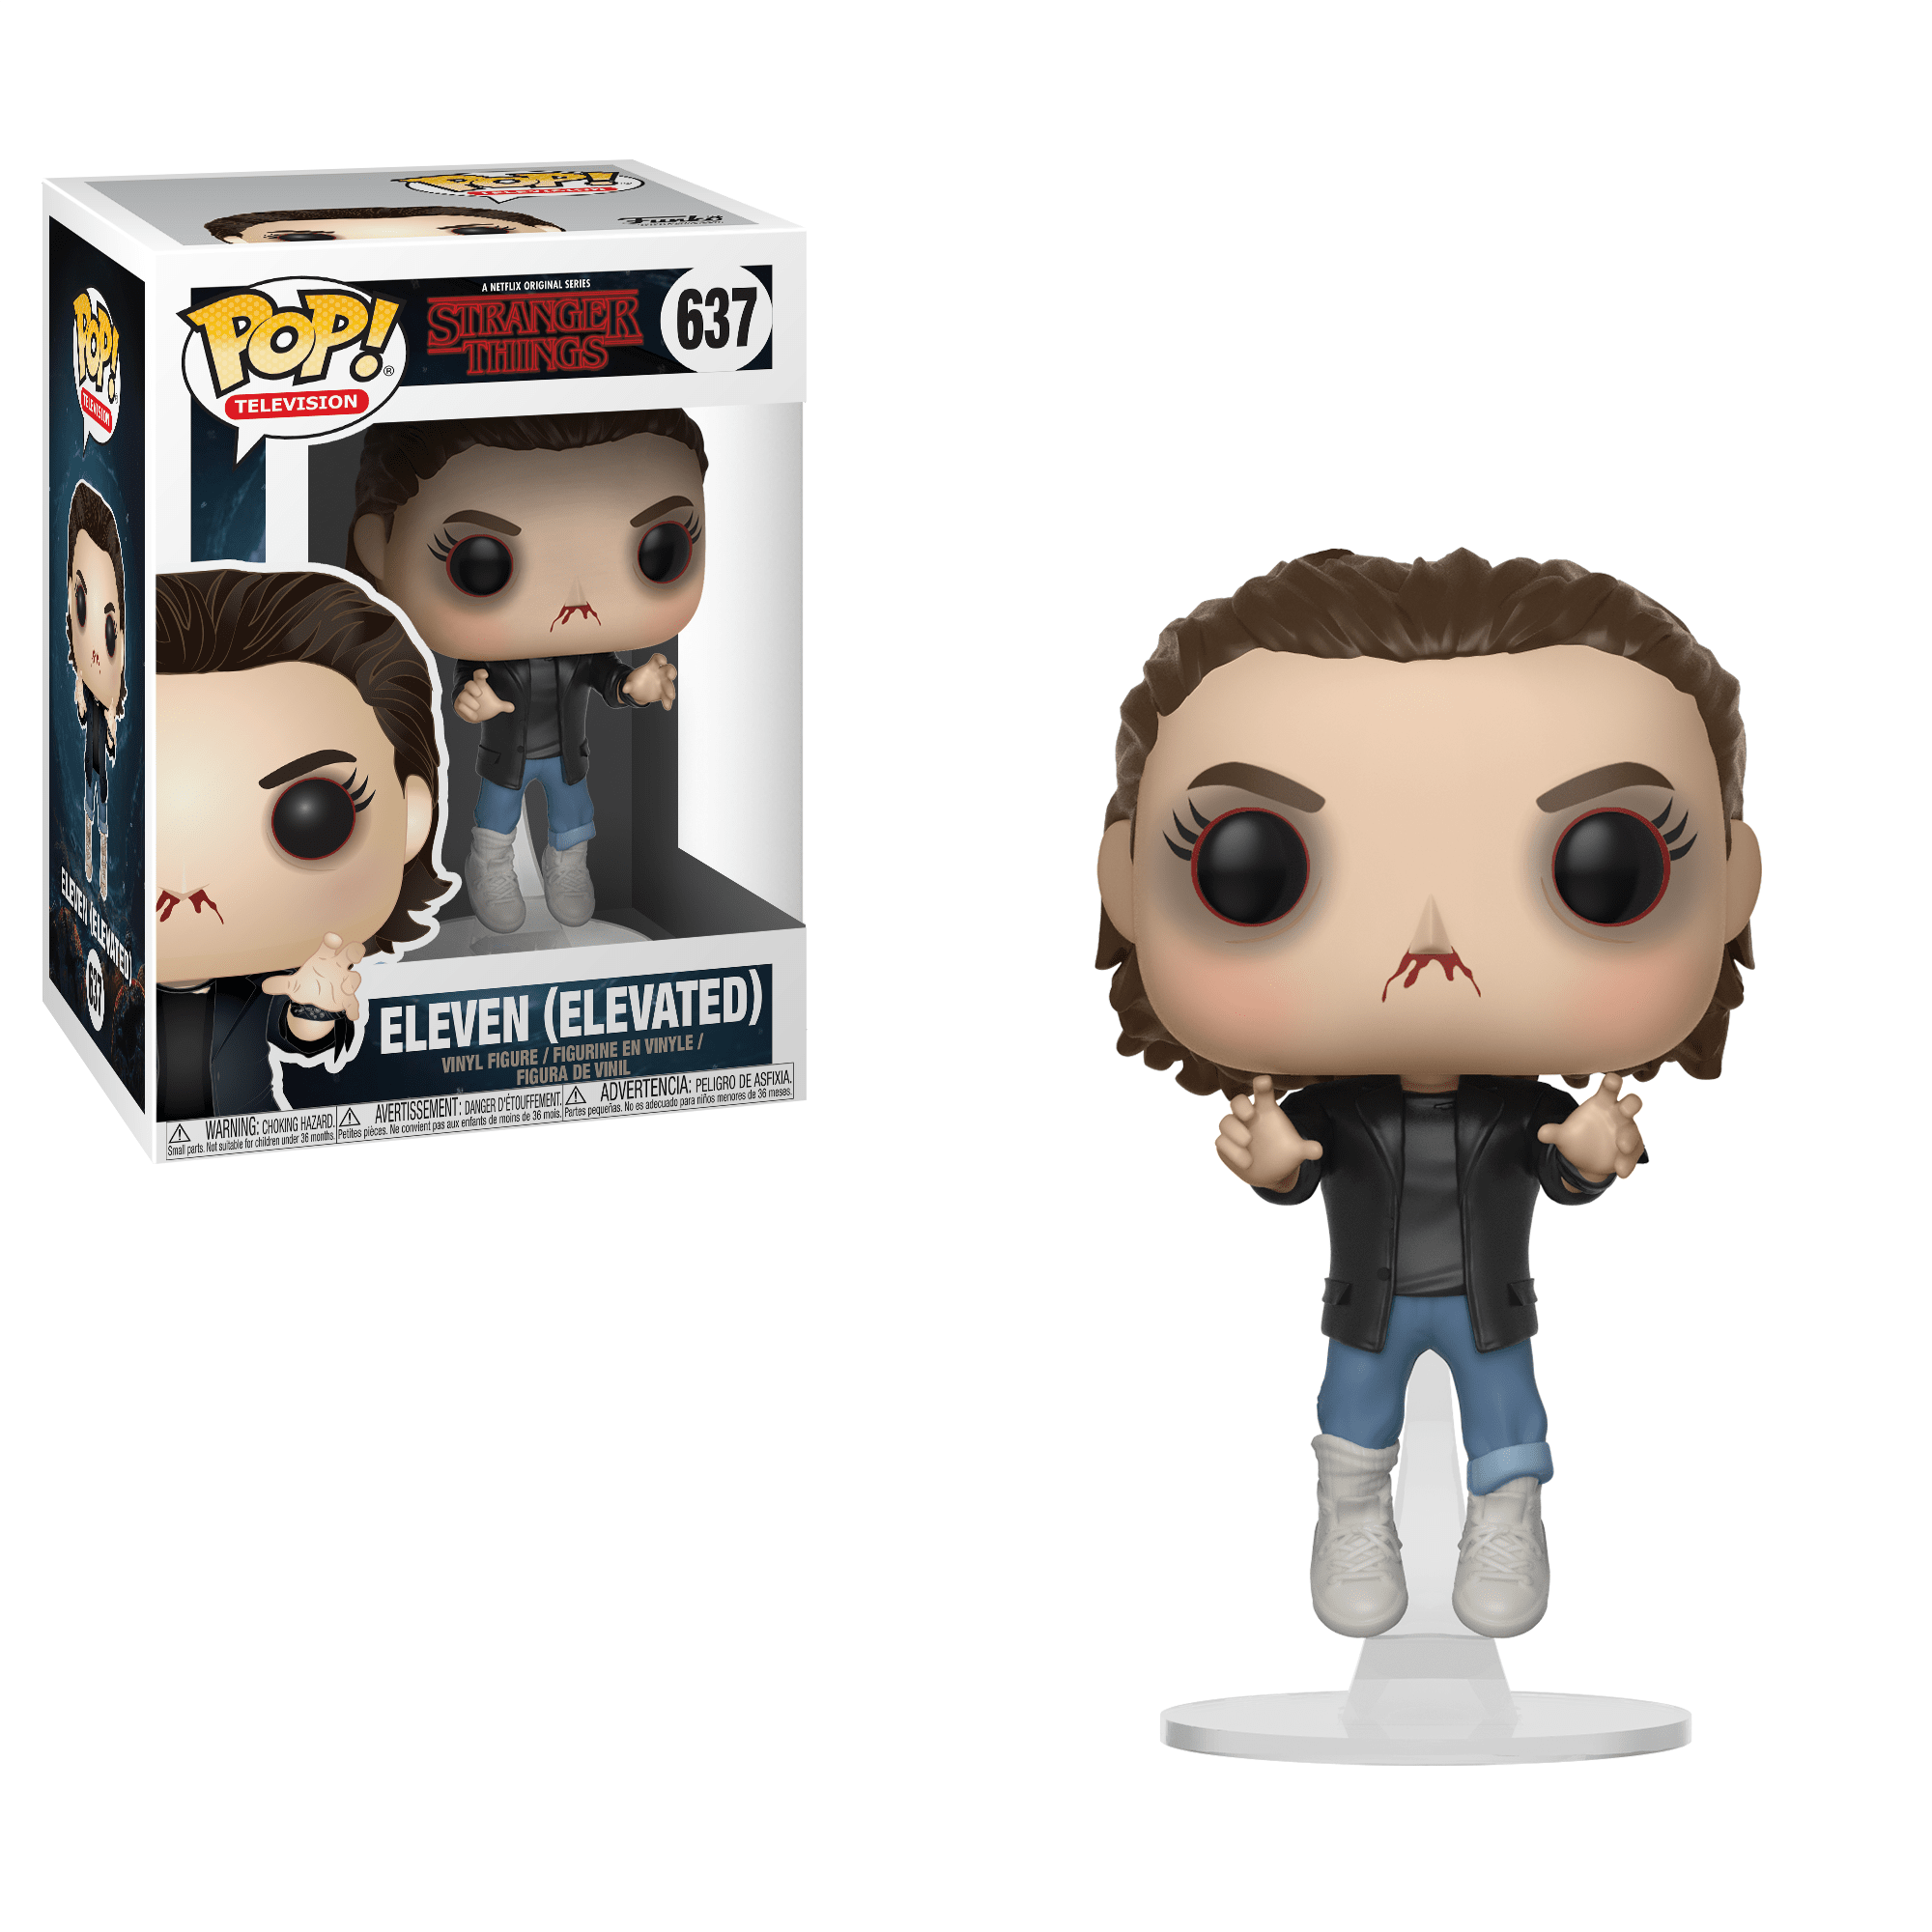 Funko Pop! Eleven - (Elevated) (Stranger Things)